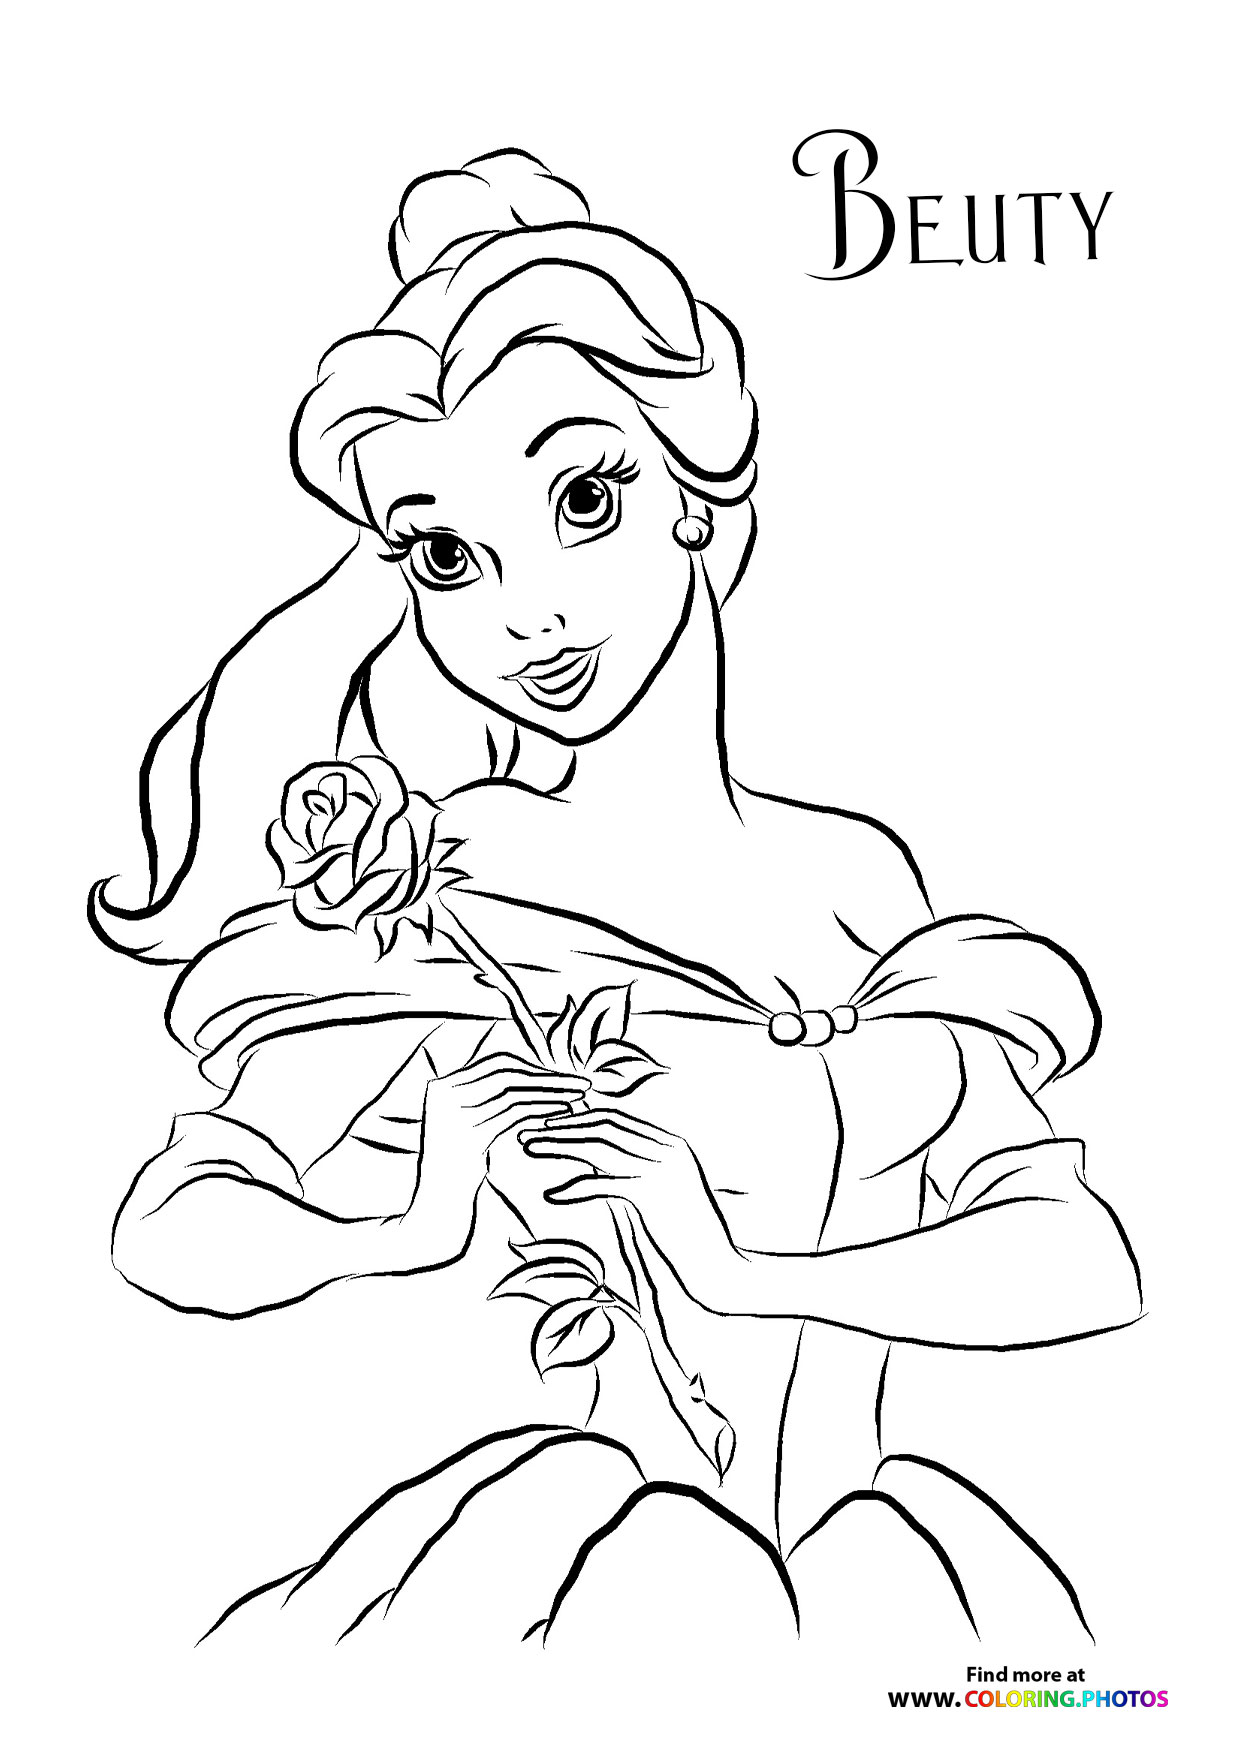 Princess belle with a flower